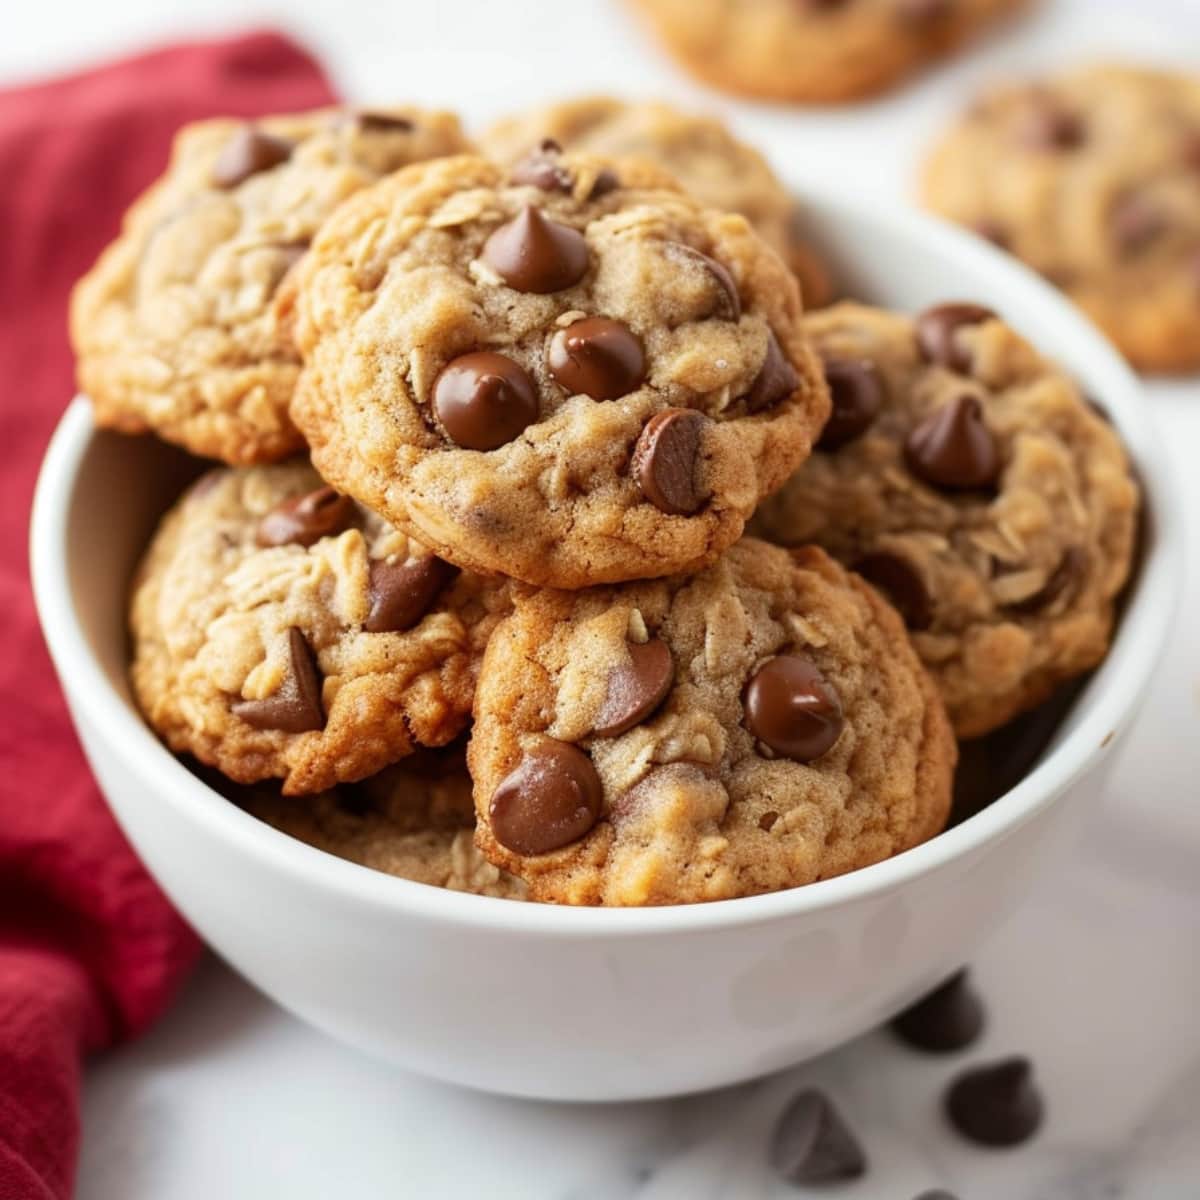 A delectable assortment of chocolate chip cookies arranged in a bowl, tempting with their golden-brown texture and mouthwatering aroma